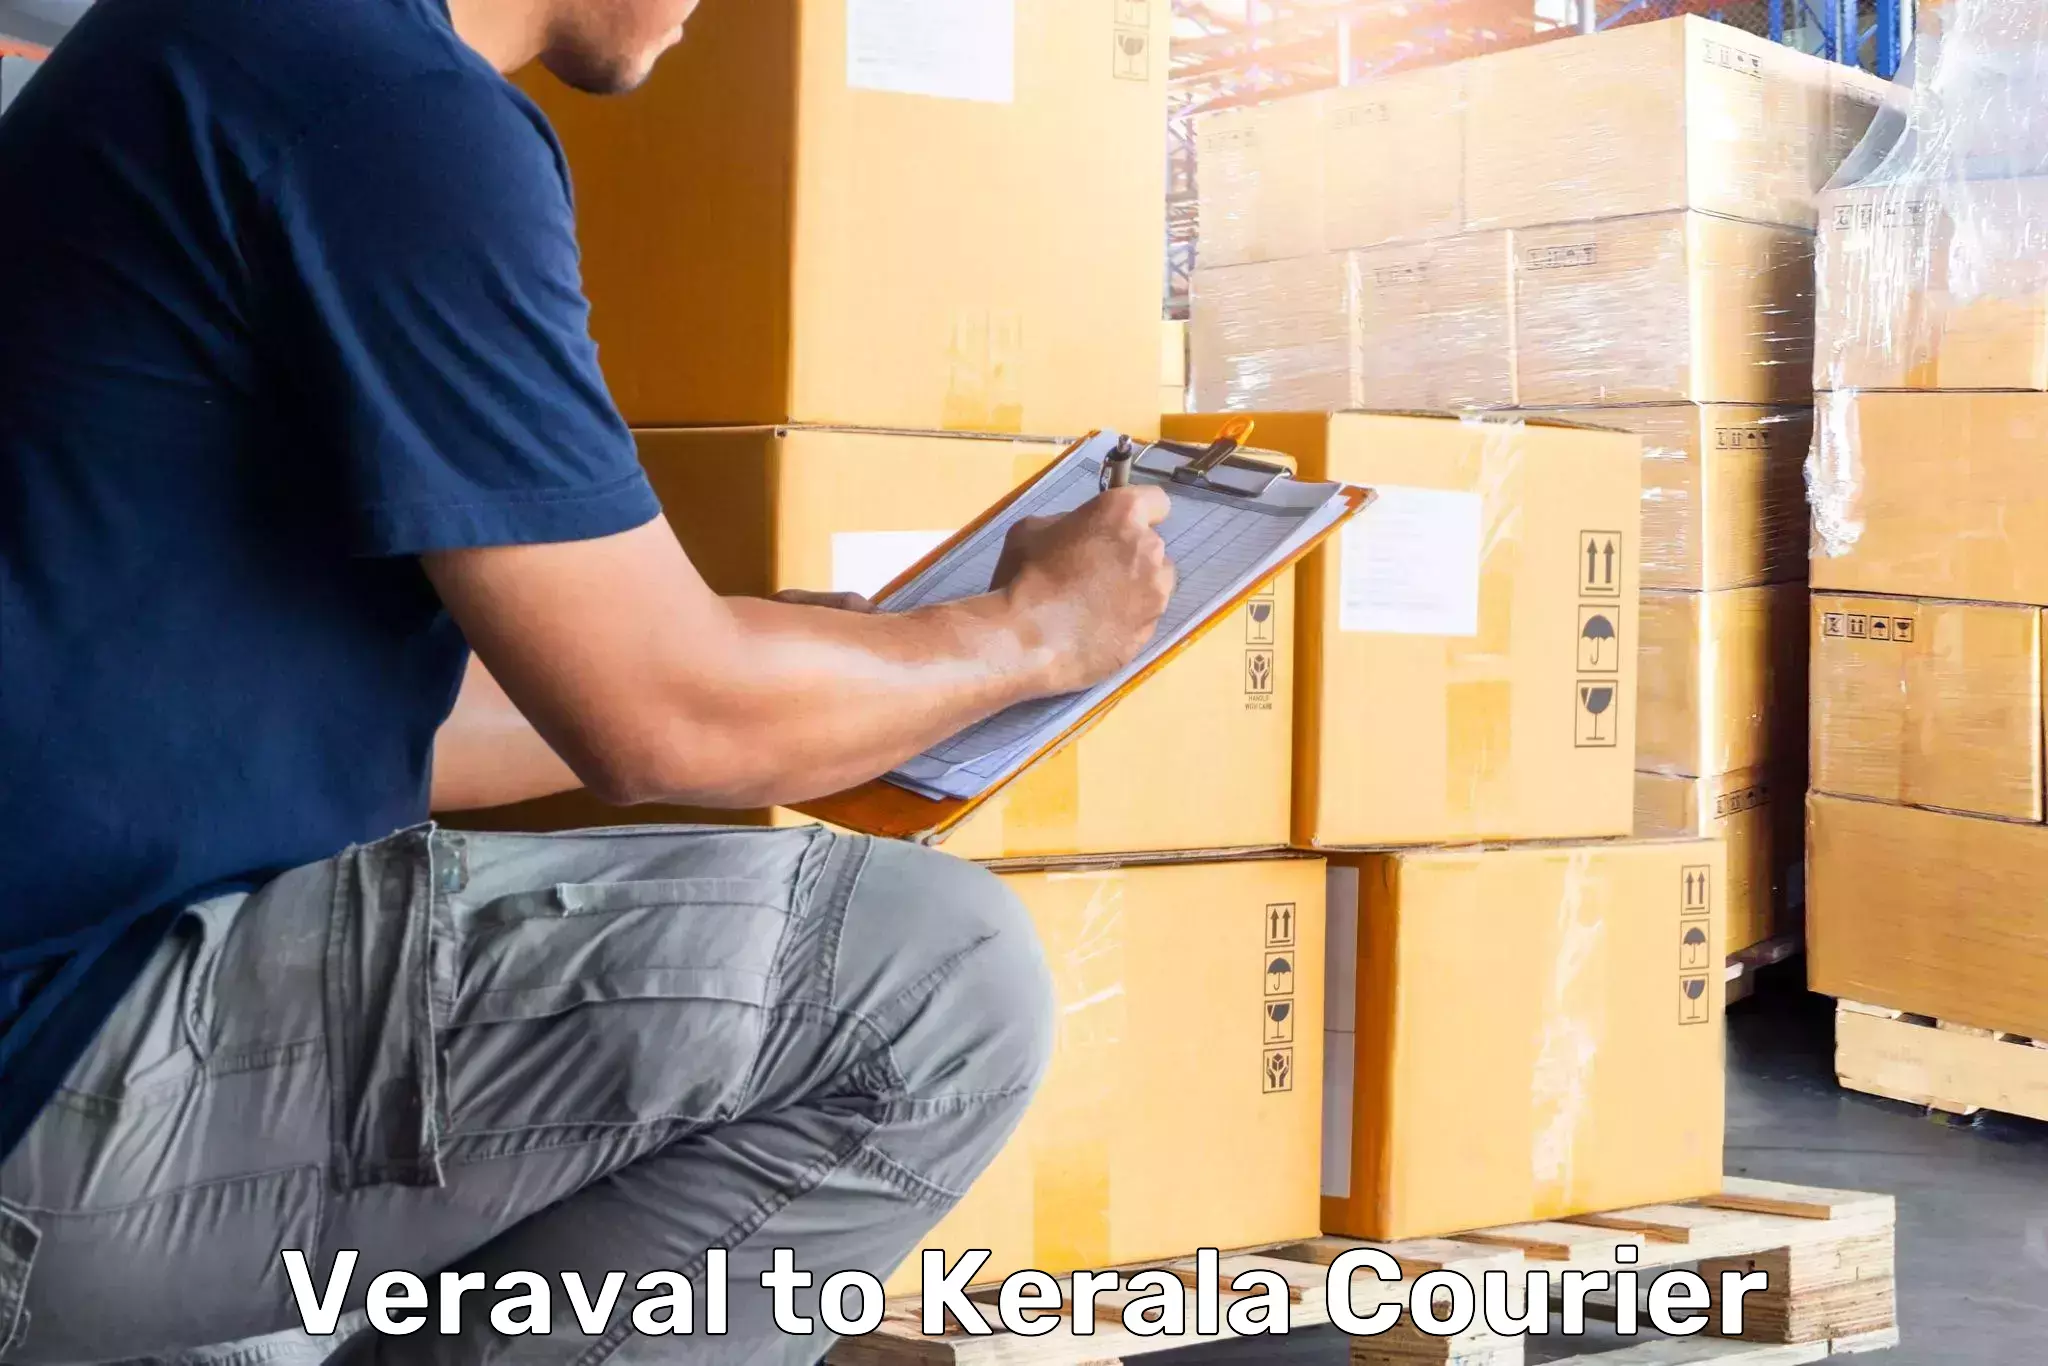 Luggage transport consultancy Veraval to Kuthiathode